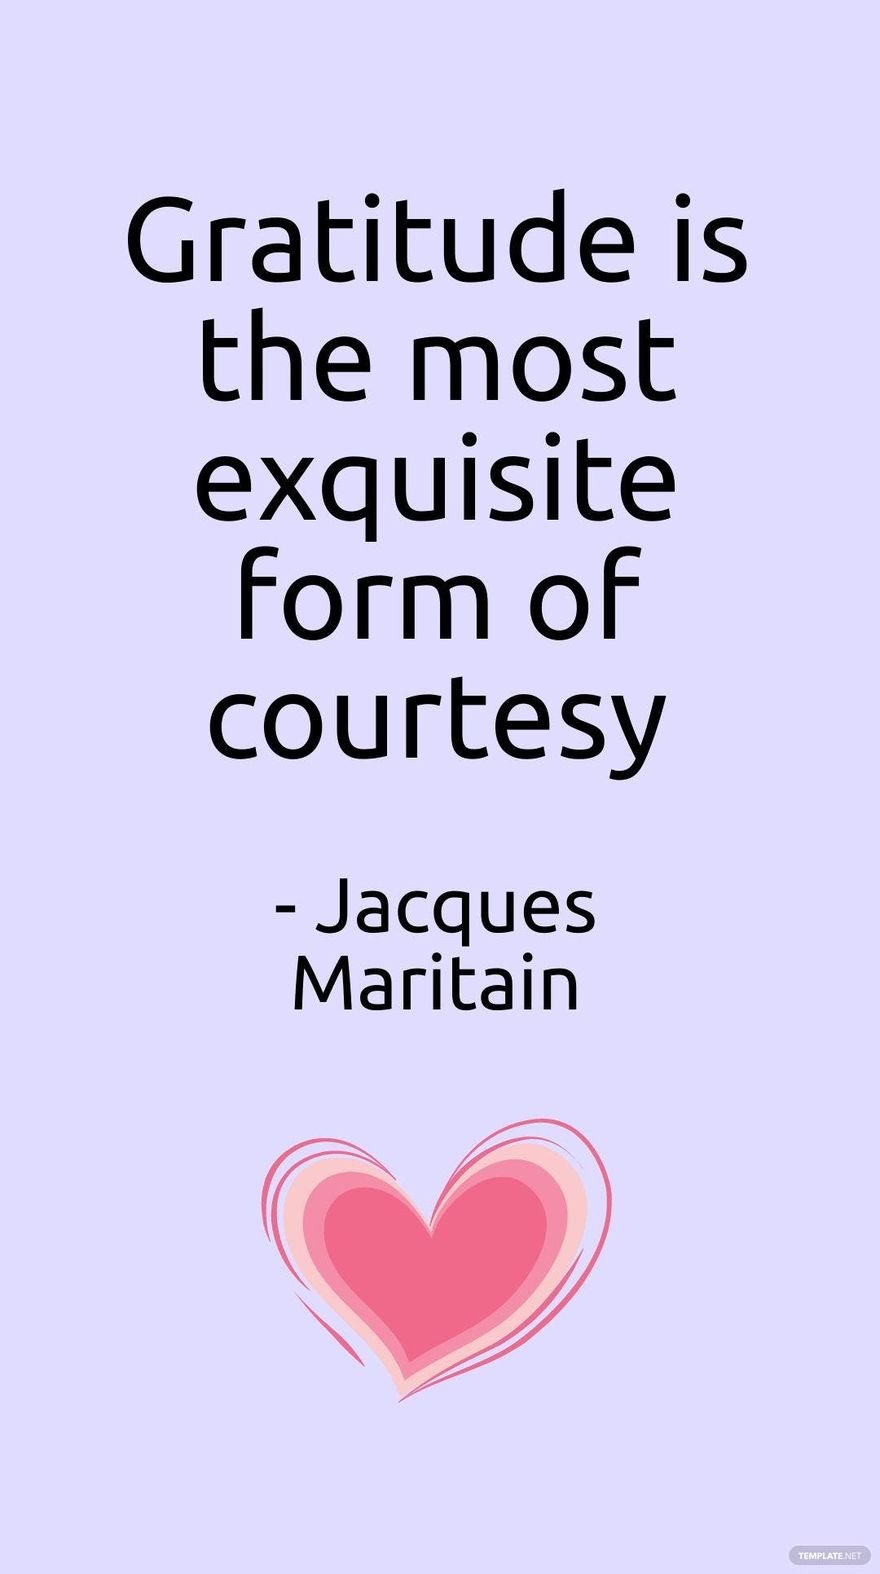 Jacques Maritain - Gratitude is the most exquisite form of courtesy